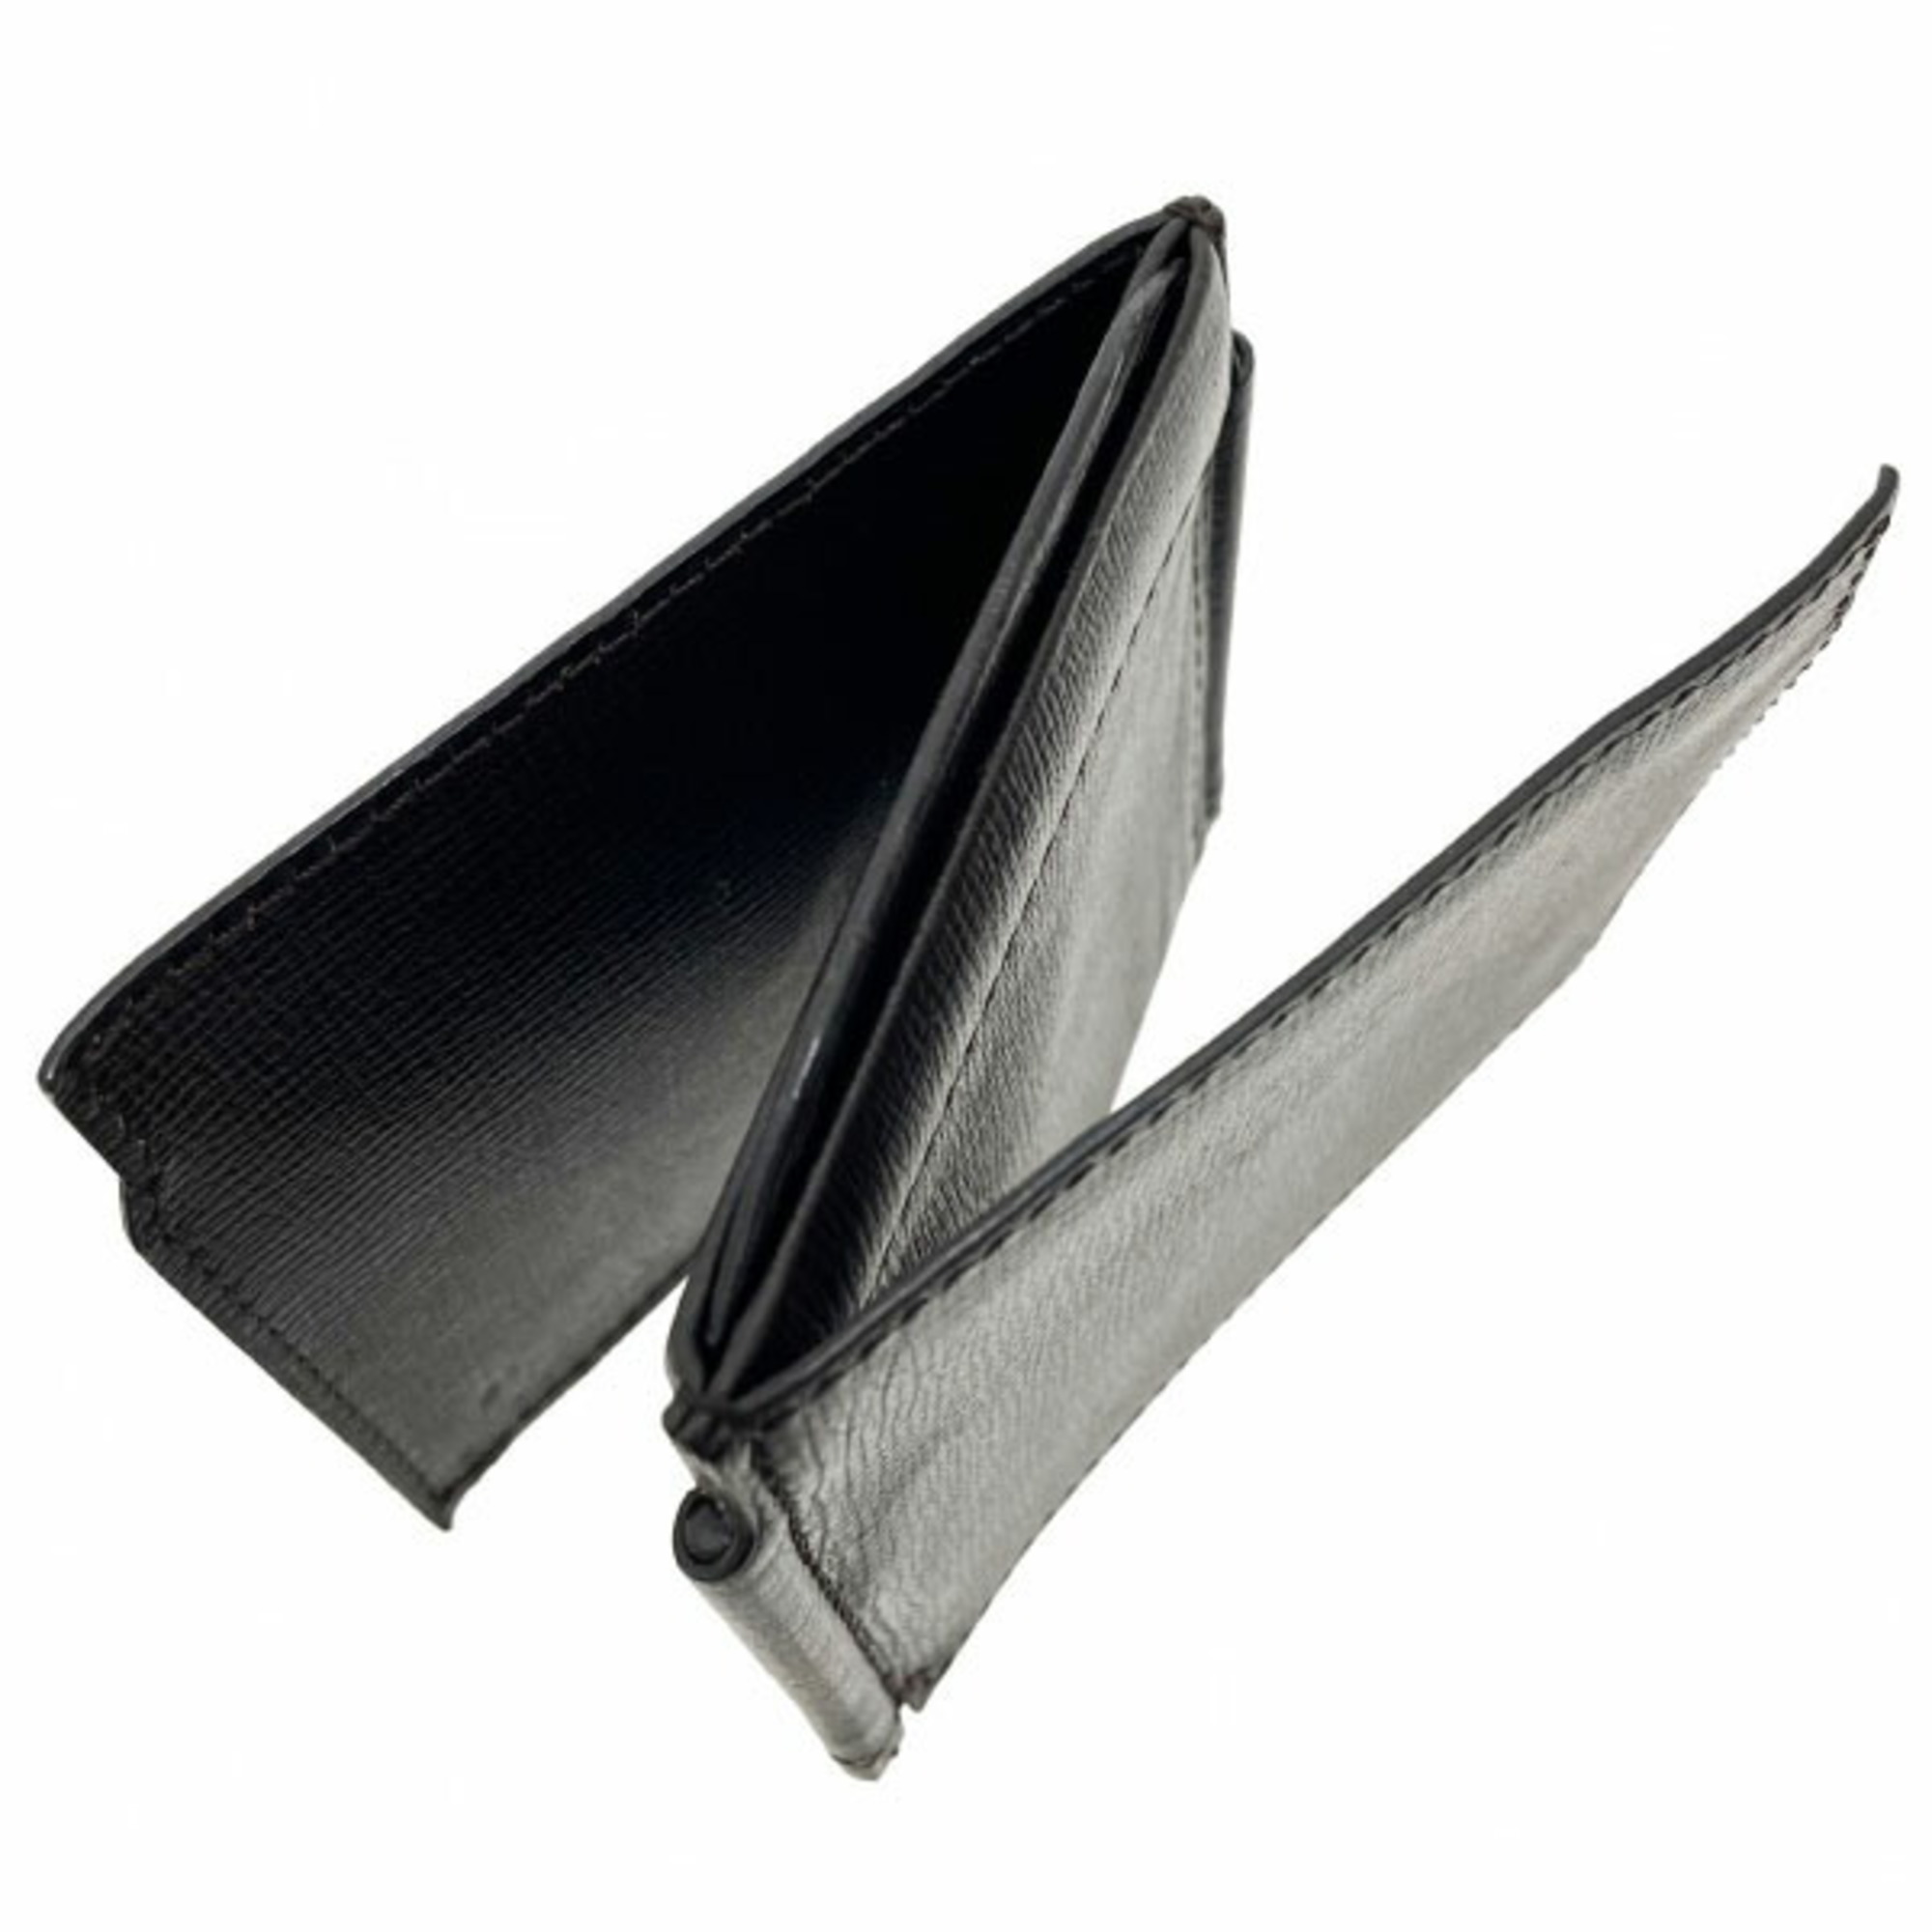 Valextra Wallet Double Money Clip Leather Dark Brown Spring Mouth Coin Purse Bill Compact KMN-13024